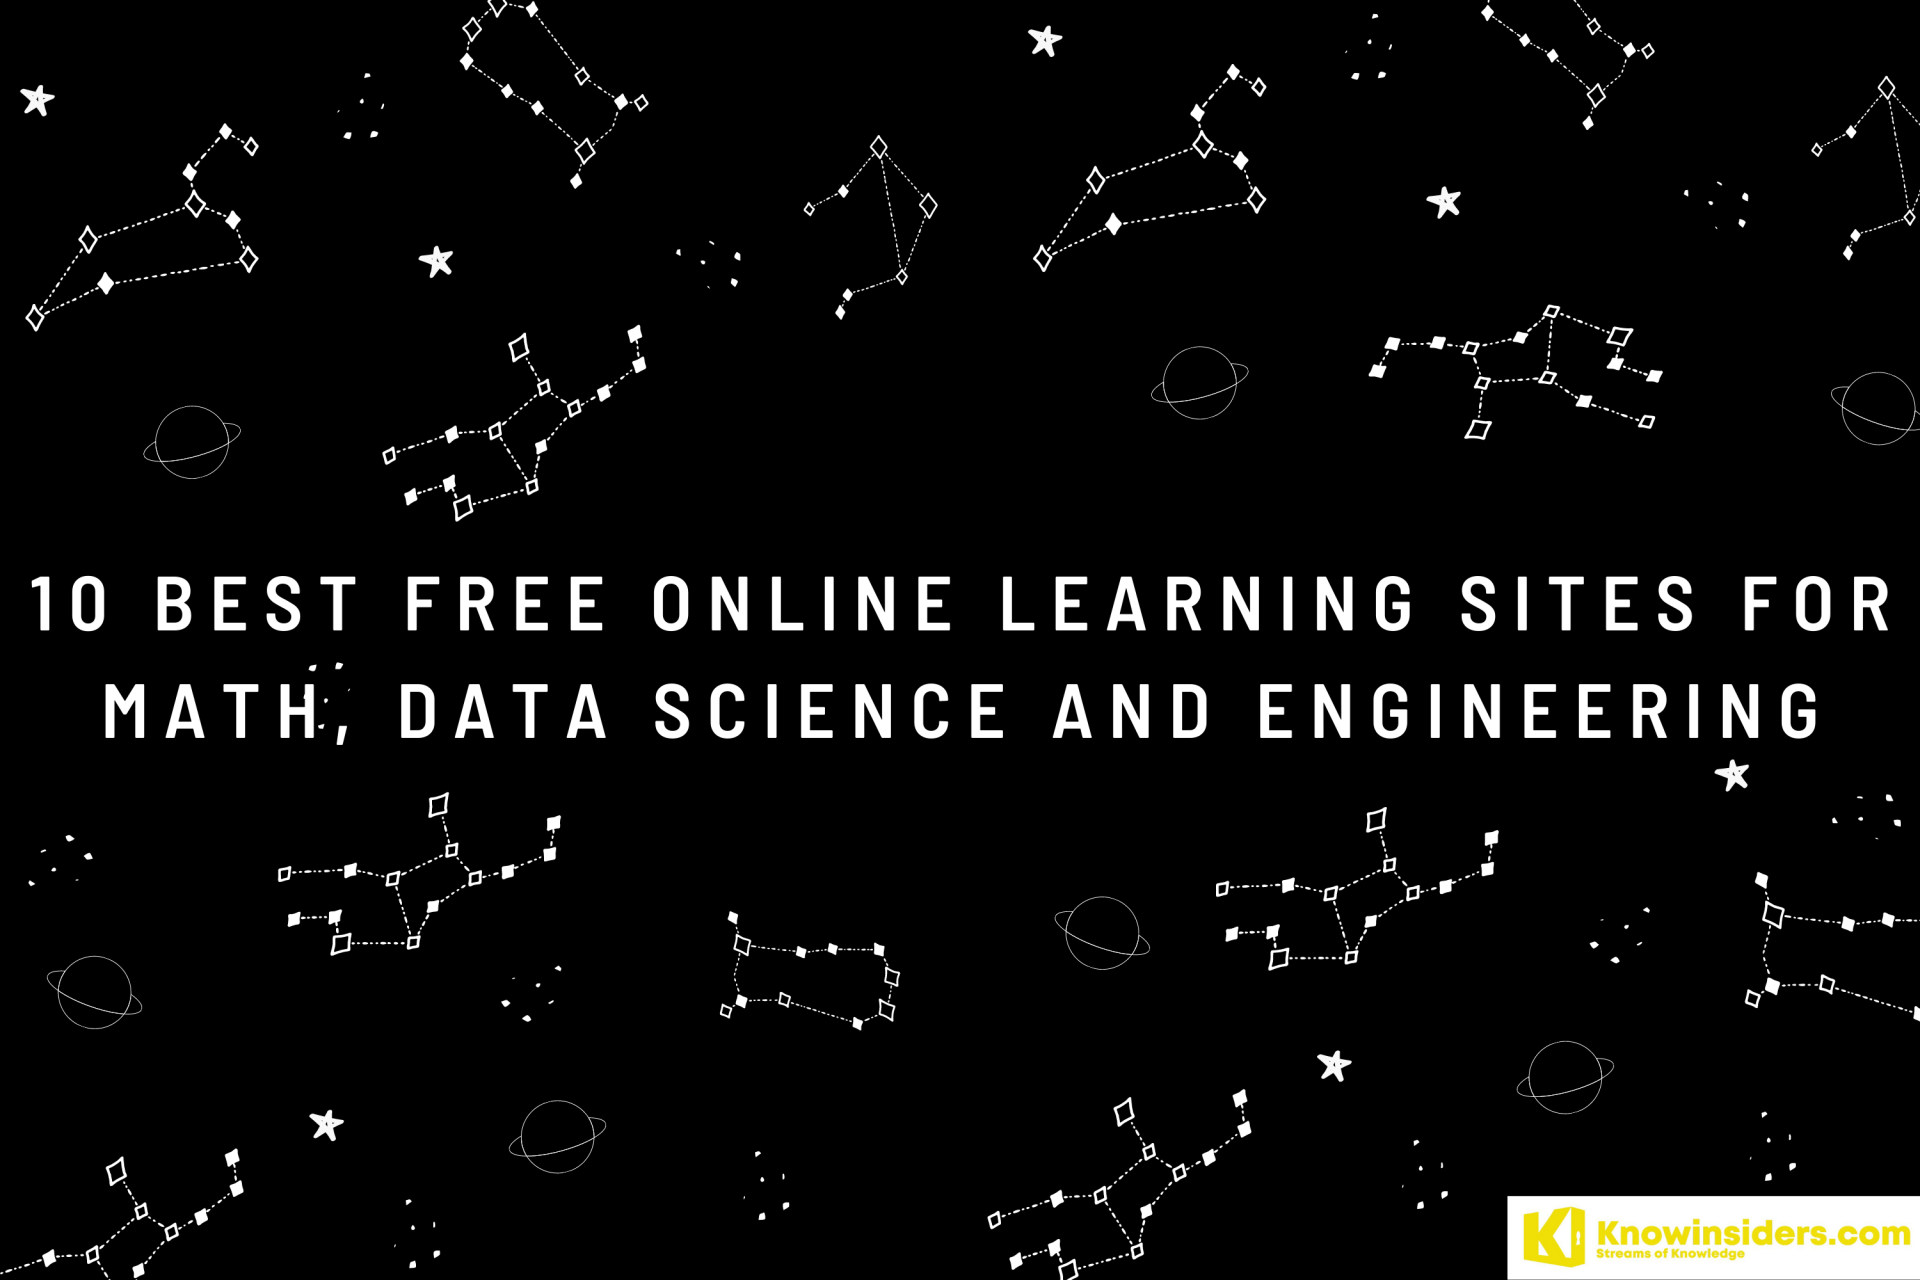 10 Best Free Sites for Online Learning in Math, Data Science & Engineering